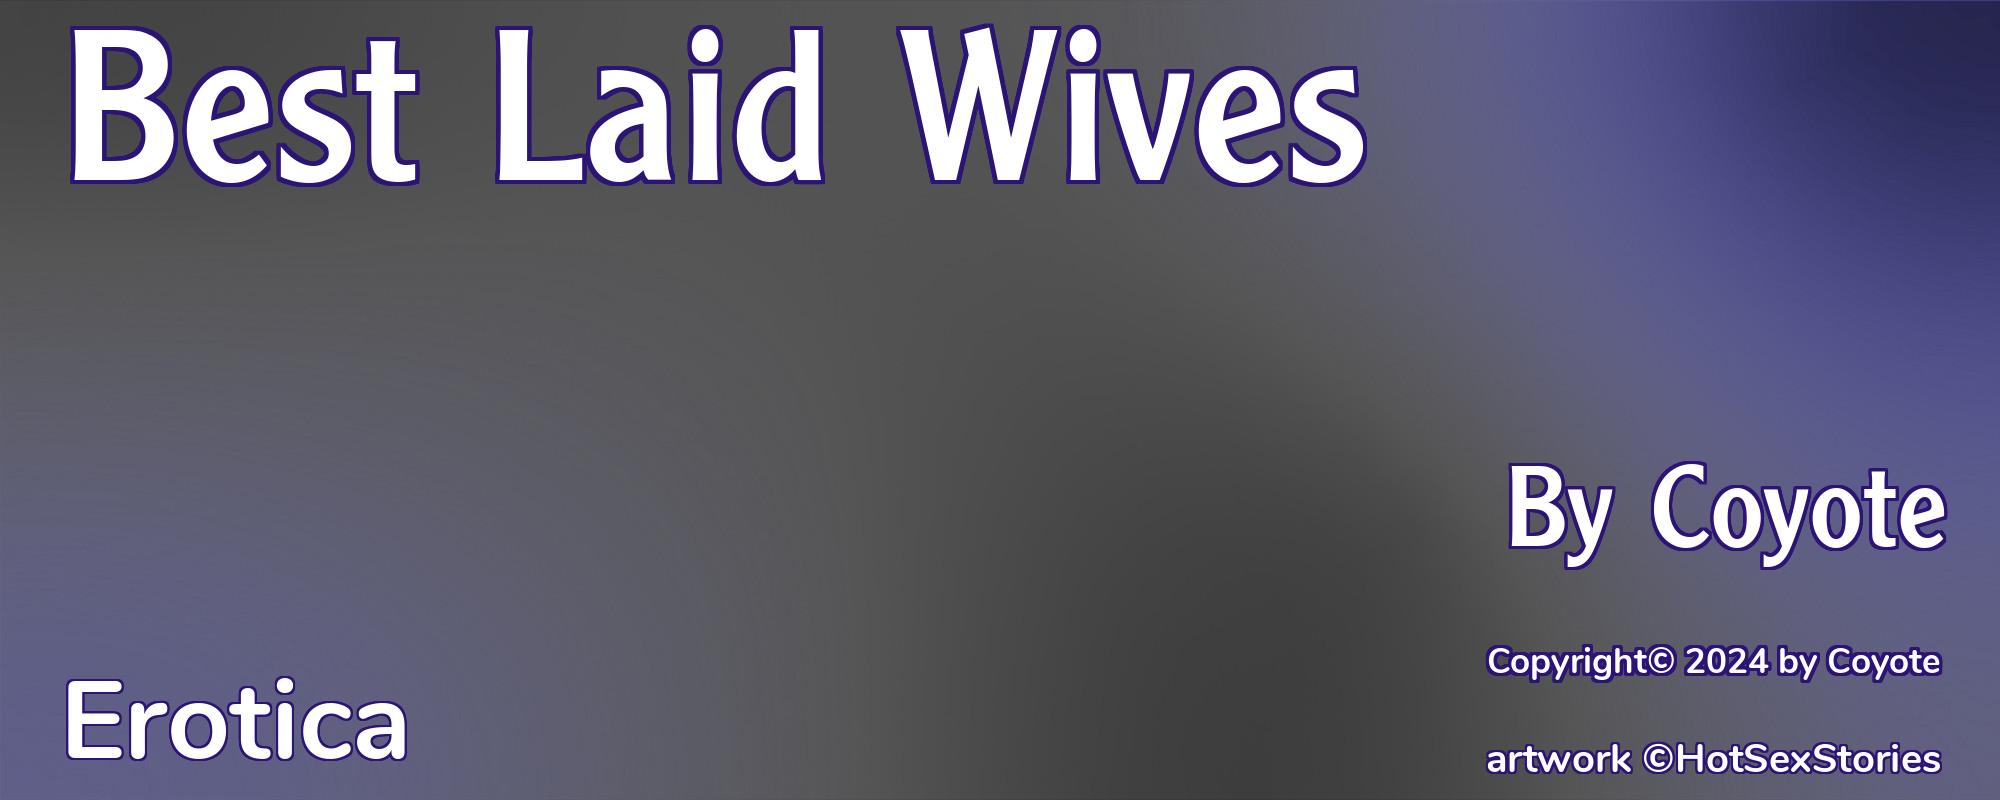 Best Laid Wives - Cover